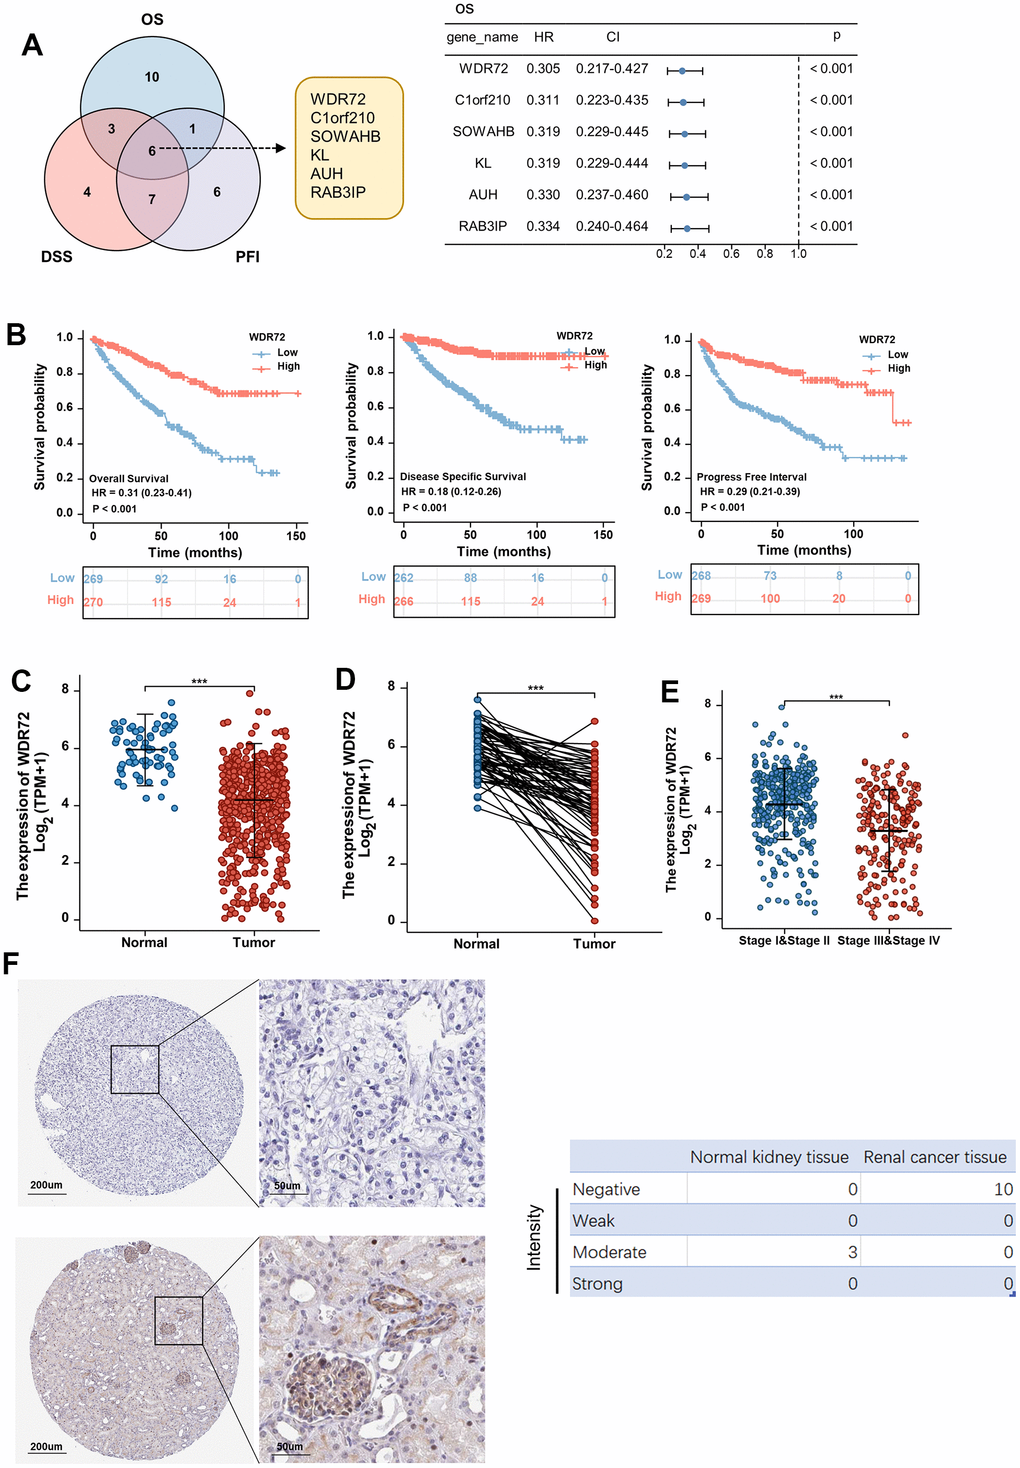 Expression and prognostic significance of WDR72 in ccRCC. (A) Overlapping genes that can improve prognosis including OS, DSS and PFI (top 20 genes) in ccRCC from TCGA data set (Left panel). Overall survival analysis for the prognostic significance of 6 overlapping genes in ccRCC (Right panel). (B) Analysis of the prognostic significance of WDR72 expression in ccRCC patients (OS, left panel; DSS, middle panel; PFI, right panel). (C) WDR72 expression in normal renal tissues and ccRCC tissues. (D) WDR72 expression in ccRCC tissues and paired adjacent normal renal tissues. (E) WDR72 expression in early (I and II) versus late (III and IV) pathological stages in ccRCC. (F) WDR72 protein expression detected by immunohistochemistry staining in RCC tissues (top panel) and normal renal tissues (bottom panel) based on The Human Protein Atlas database (Left panel). Intensity of WDR72 protein was divided into four levels, including Negative, Weak, Moderate and Strong. Abbreviations: WDR72, WD repeat-containing protein 72; ccRCC, clear cell renal cell carcinoma; HR, hazard ratio; CI, confidence interval; OS, overall survival; DSS, disease specific survival; PFI, progress free interval; TCGA, The Cancer Genome Atlas. ***P 